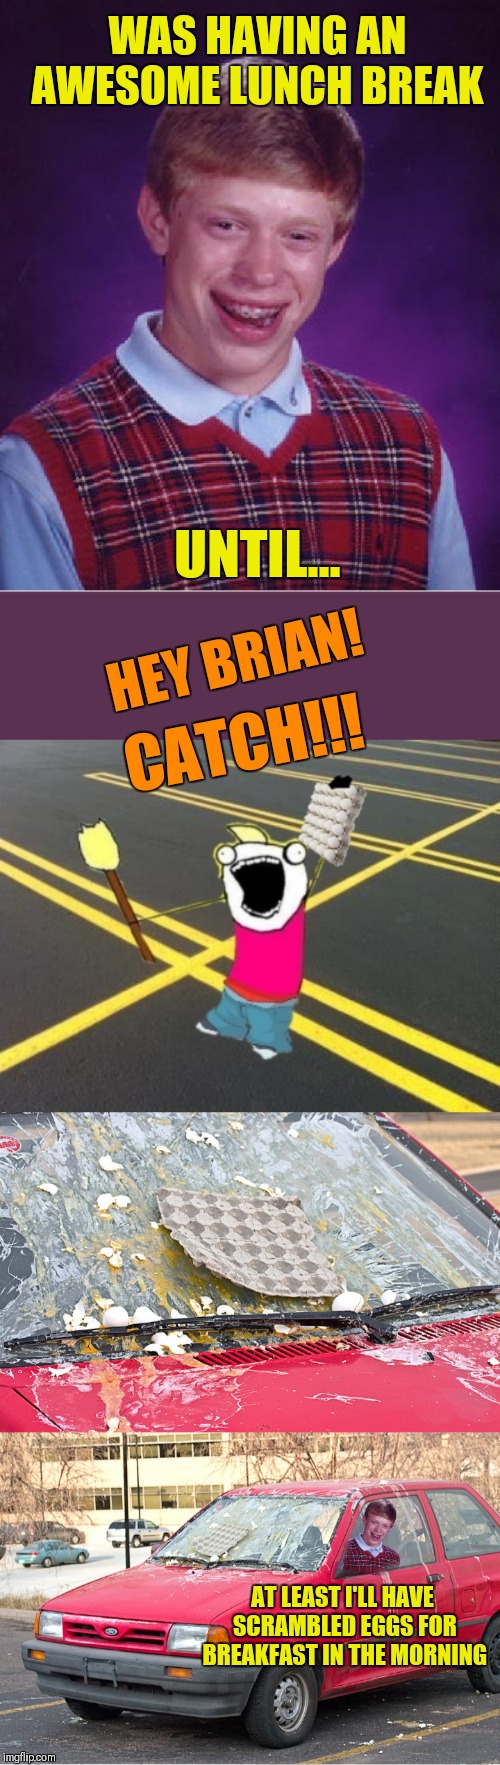 I hope this CRACKS you up! (Inspired by a meme comment from Beckett437) | WAS HAVING AN AWESOME LUNCH BREAK; UNTIL... HEY BRIAN! CATCH!!! AT LEAST I'LL HAVE SCRAMBLED EGGS FOR BREAKFAST IN THE MORNING | image tagged in memes,bad luck brian,eggs,beckett437,breakfast,44colt | made w/ Imgflip meme maker